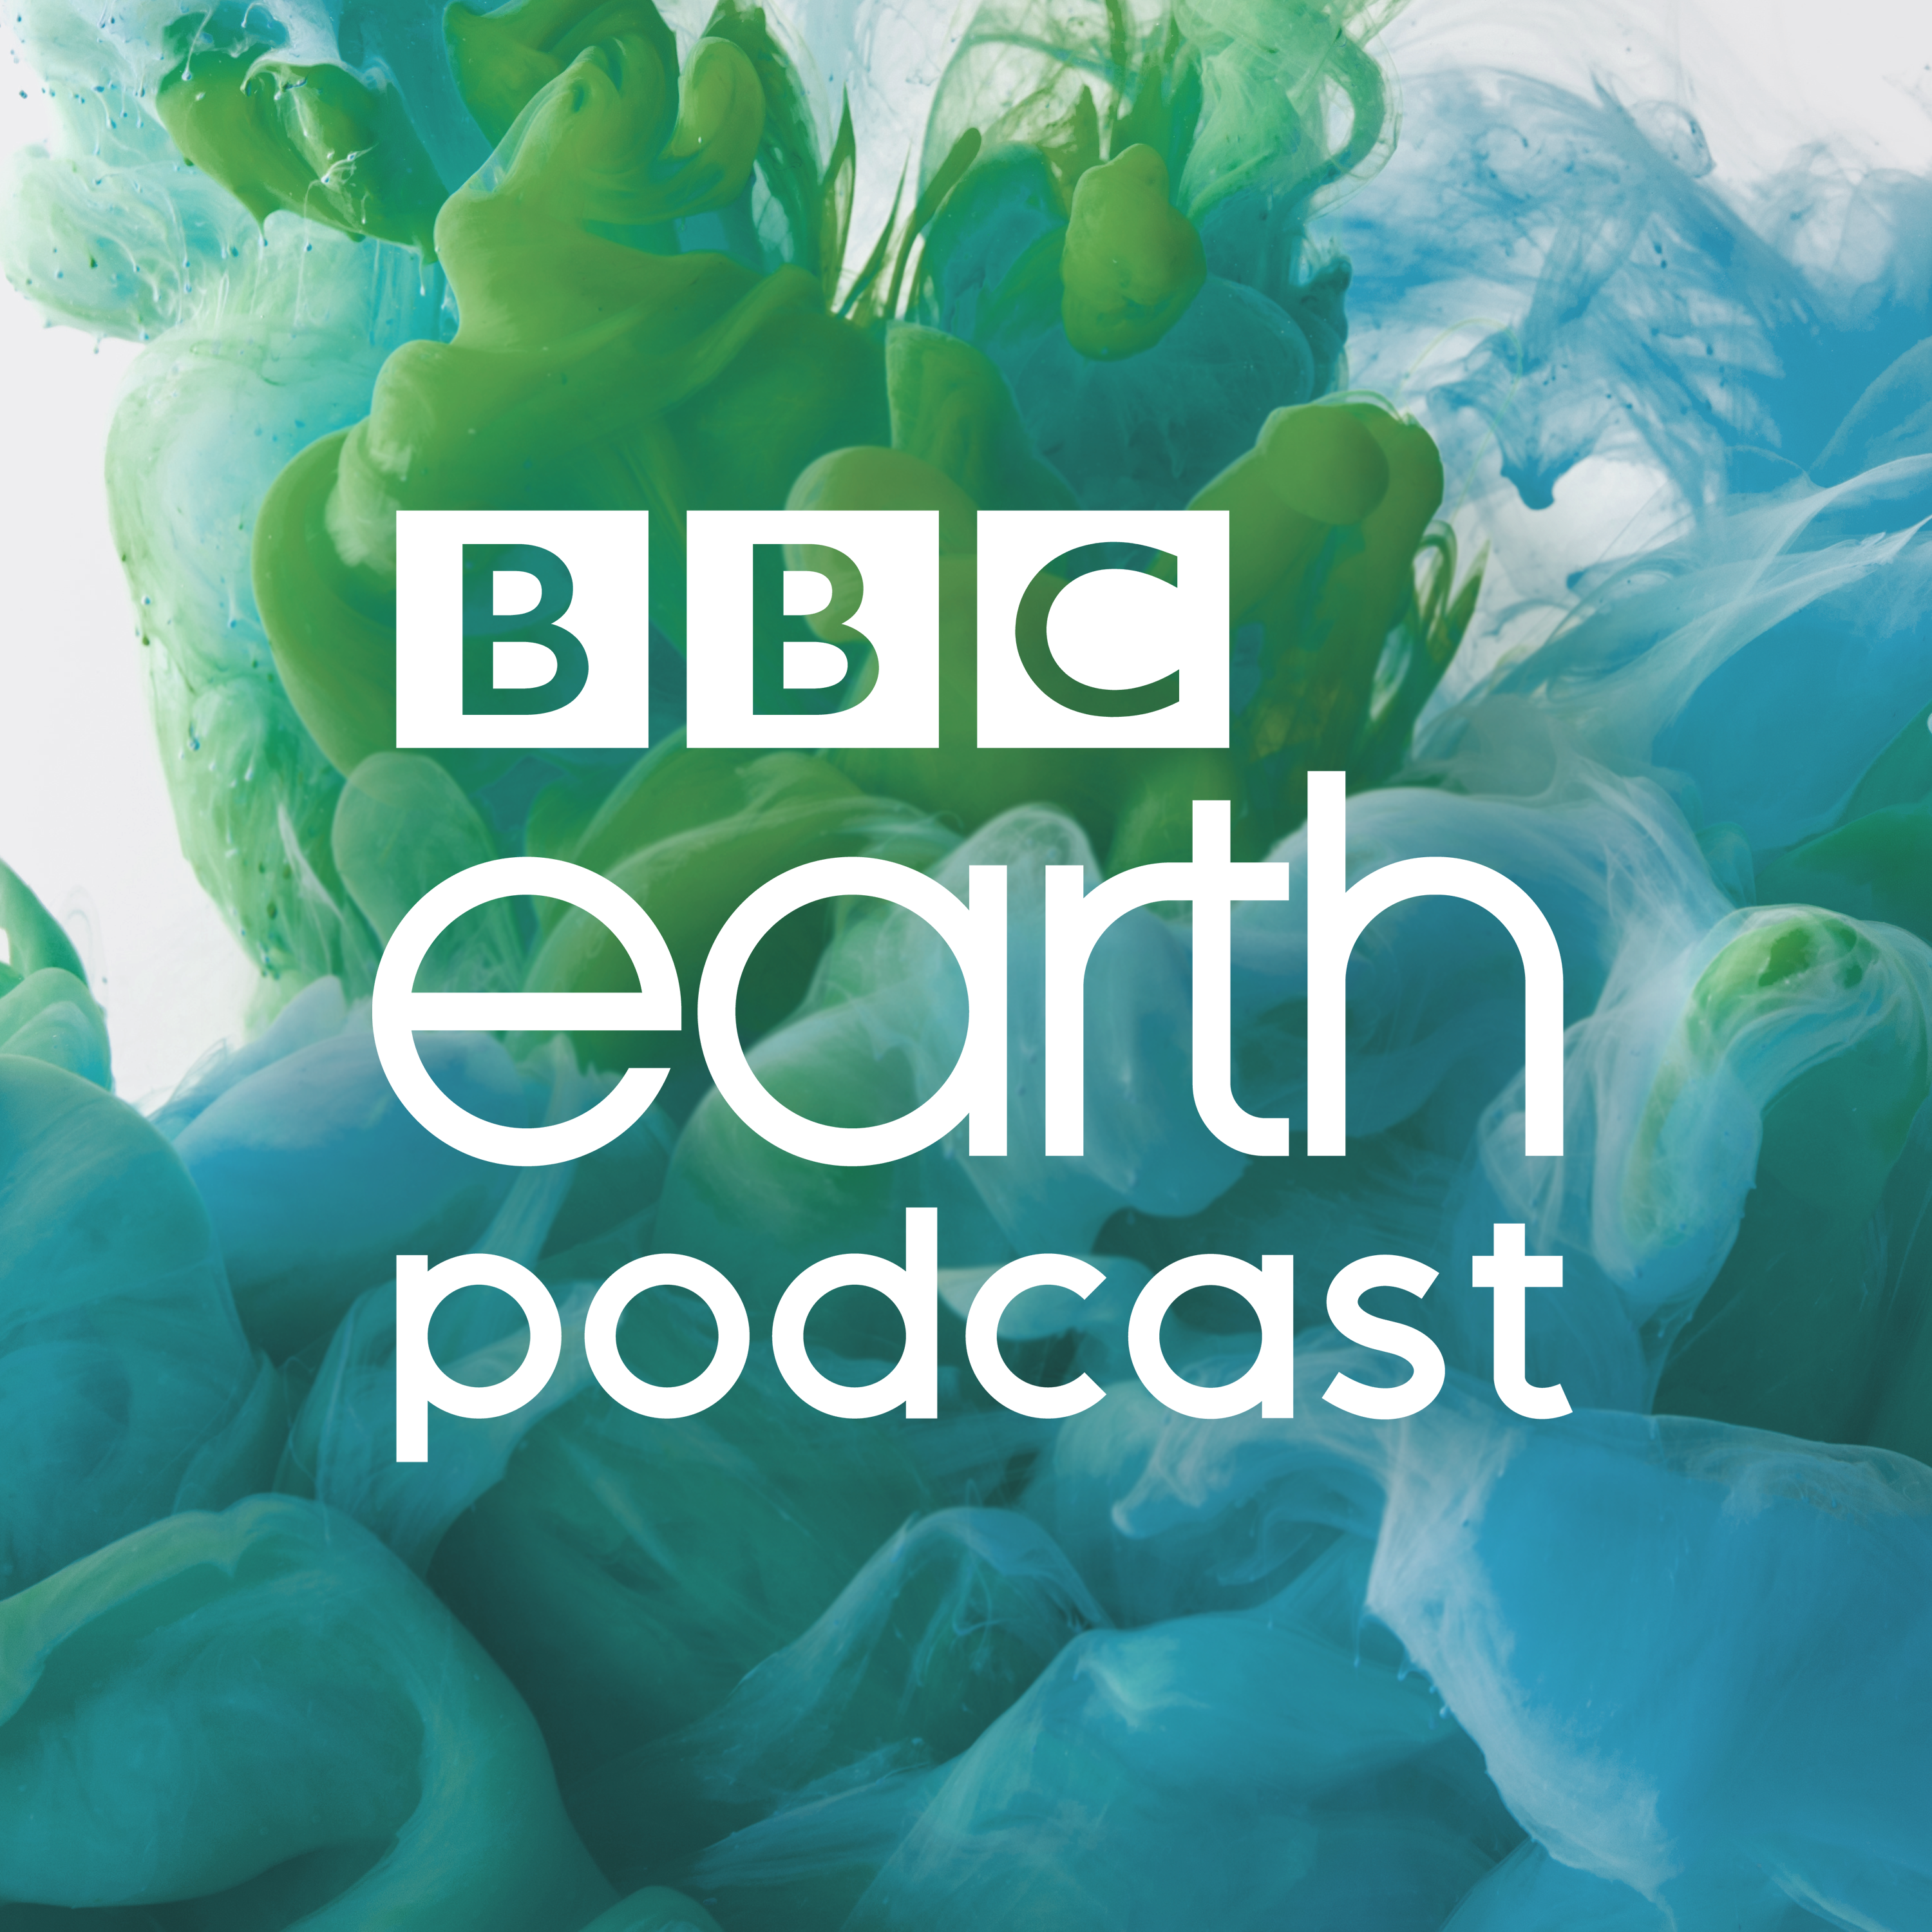 BBC Earth Podcast podcast show image